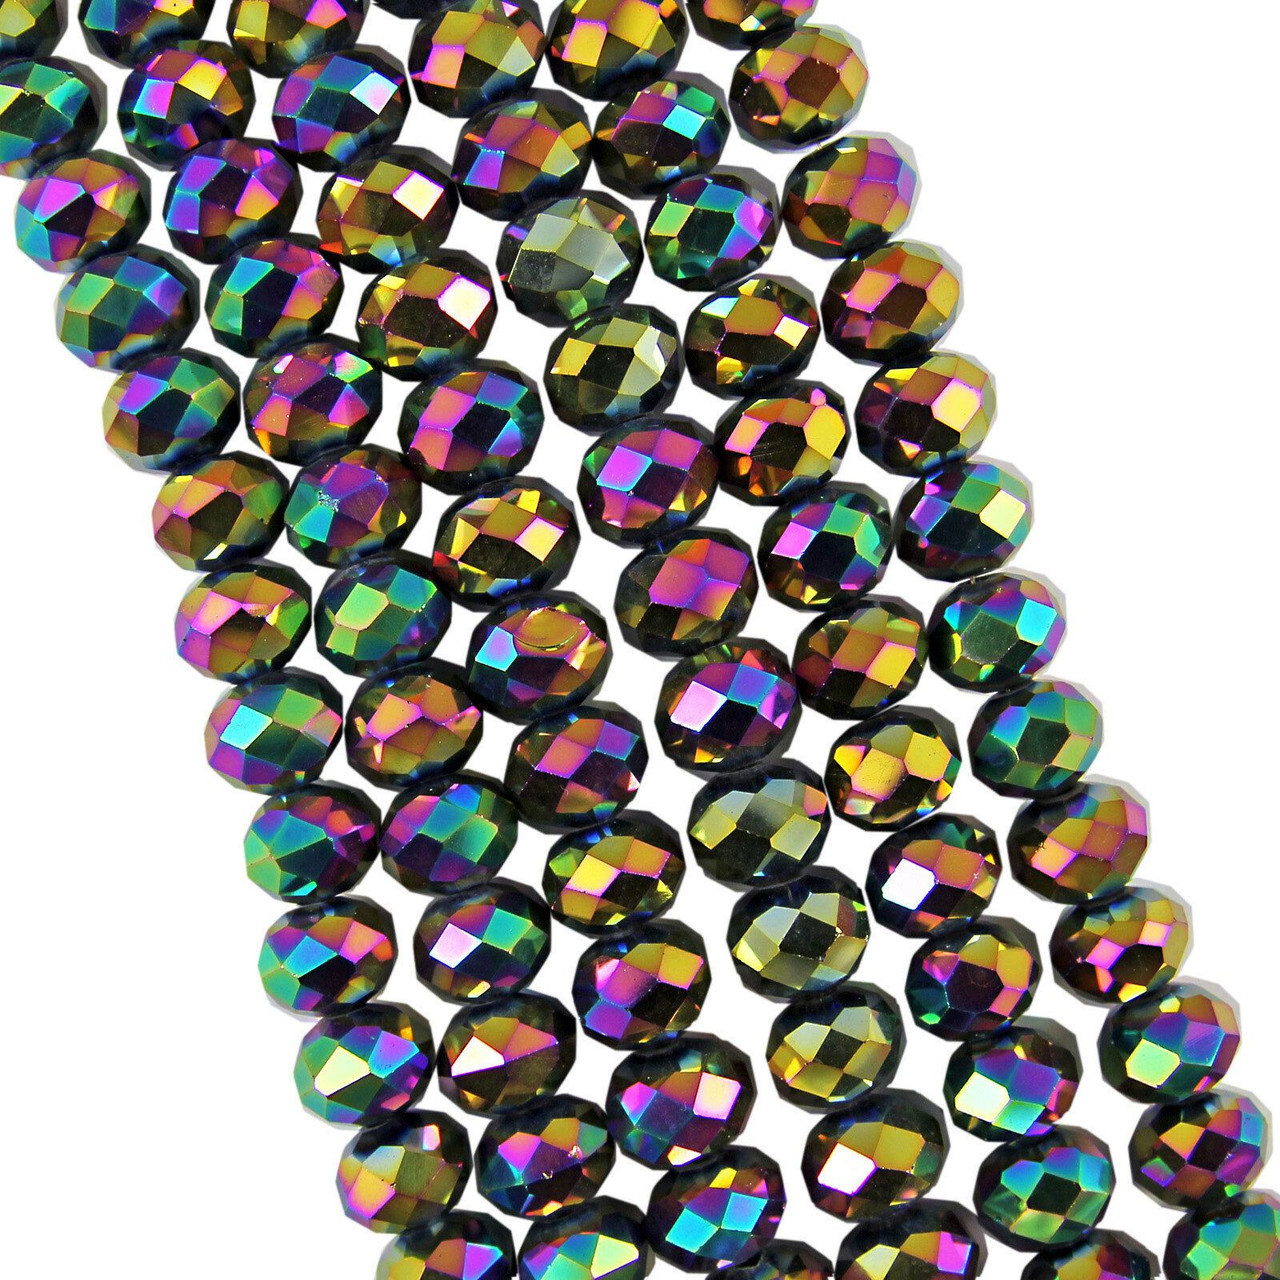 3x2mm Faceted Glass Rondelle beads - MULTICOLOUR METALLIC - approx 16" strand (approx 200 beads)